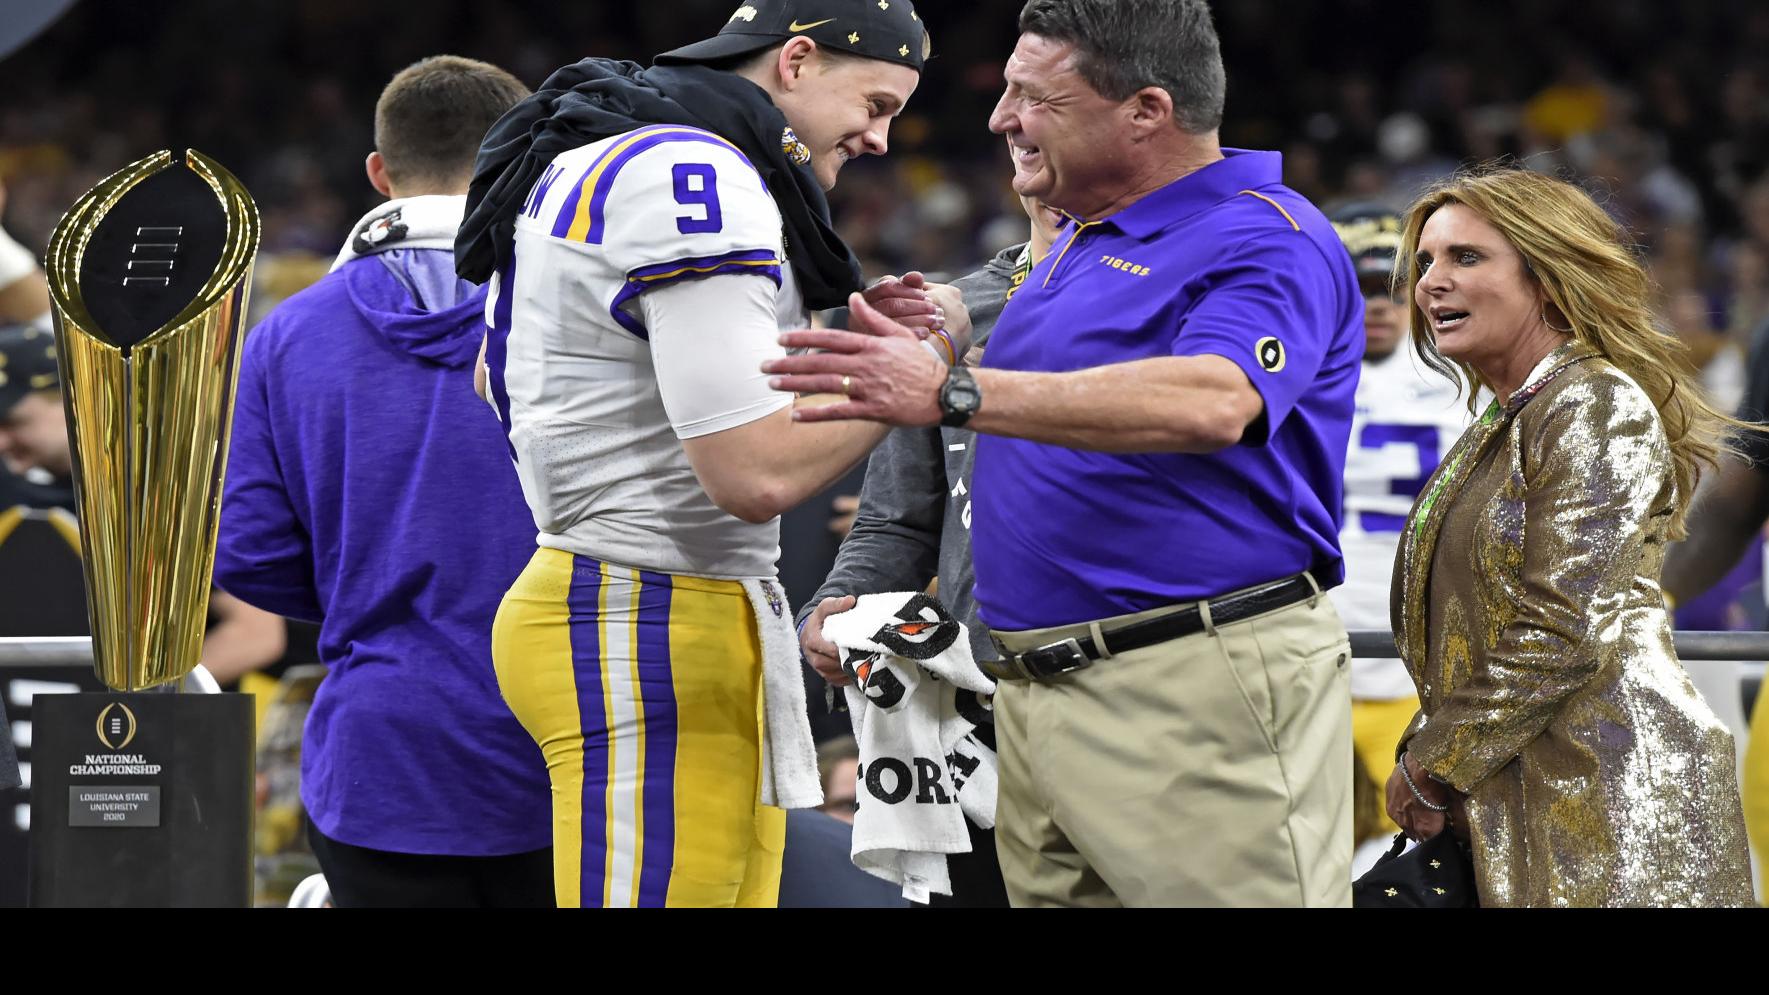 Six state championships display thrill of victory, agony of defeat -  Mississippi Today